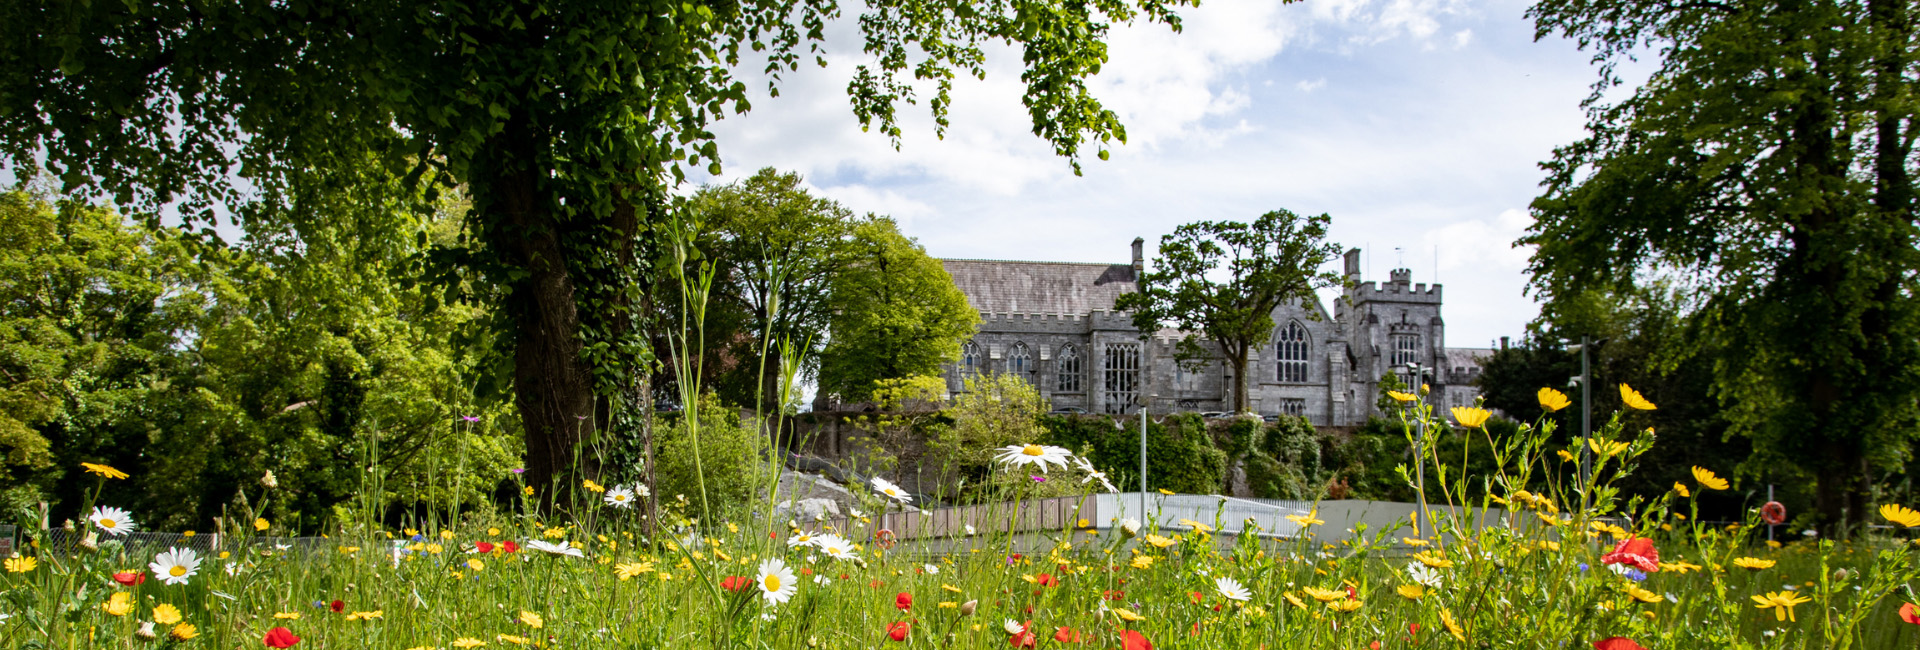 photograph of a flower-filled meadow in front of a large grey castle-like stone building with trees on the edges of the photo